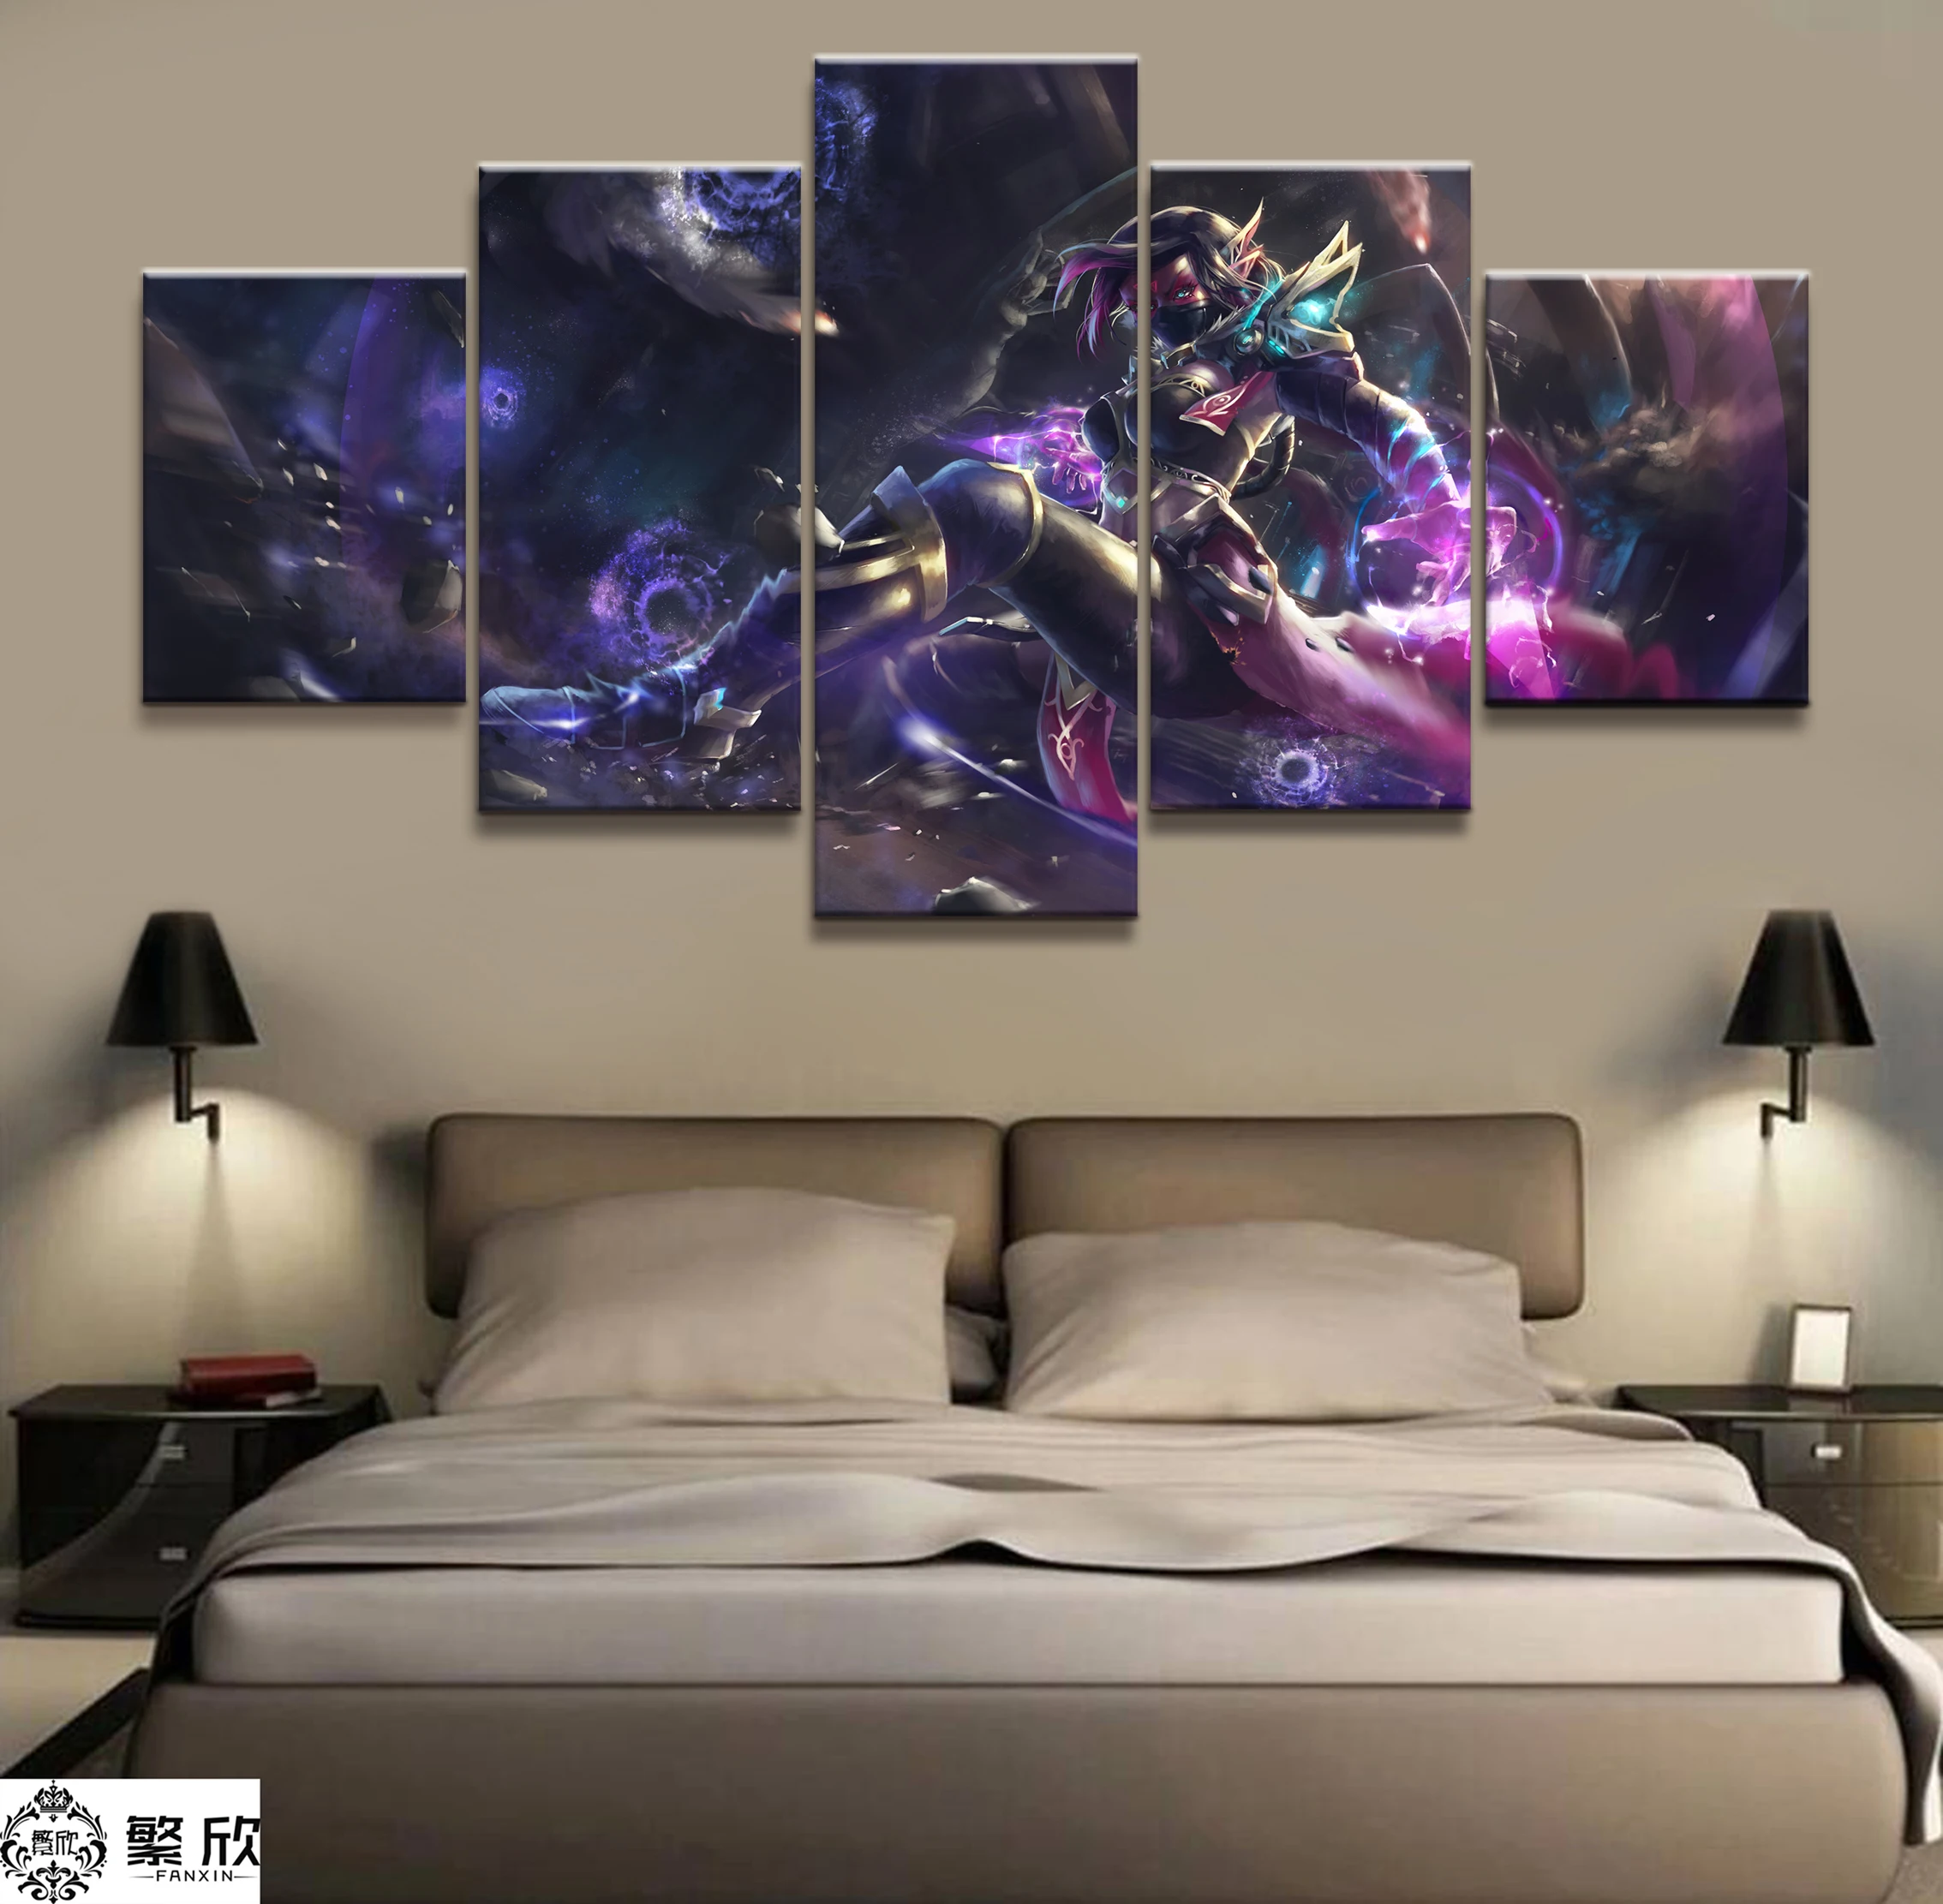 

Home Decor Modular Canvas Picture 5 Piece Dota 2 Templar Assassin Game Painting Poster Wall For Home Canvas Painting Wholesale